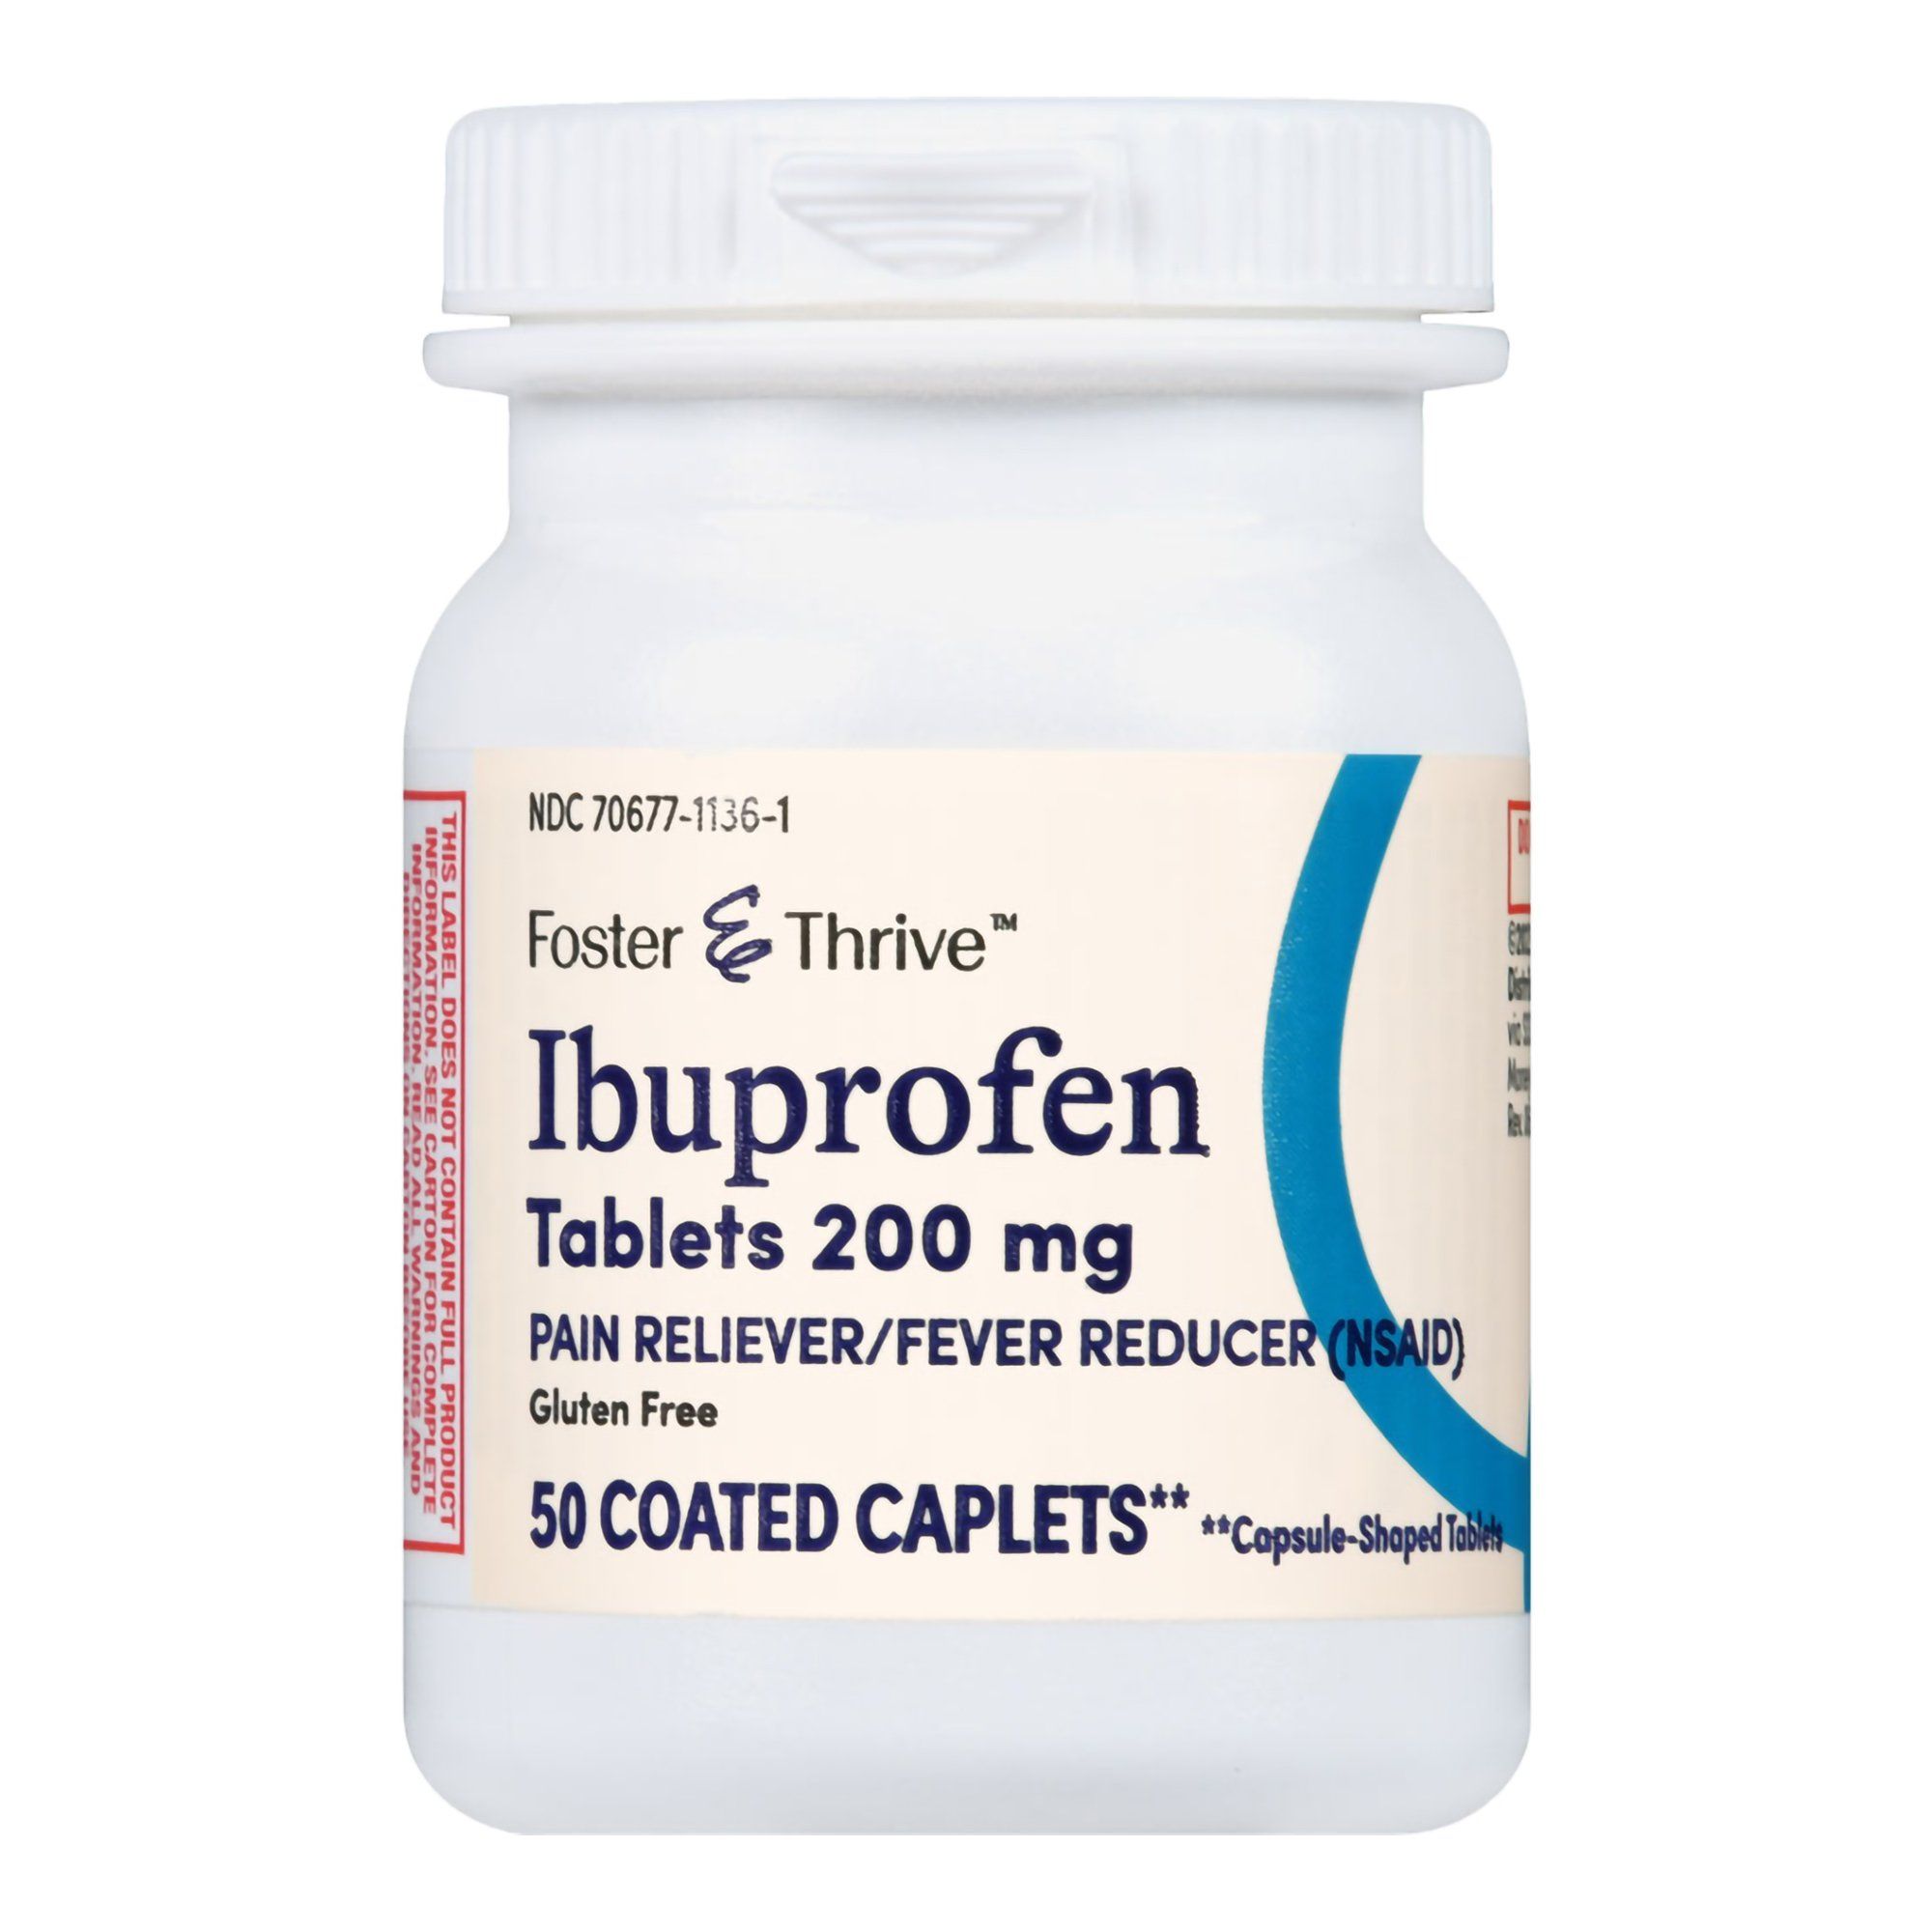 Foster & Thrive Ibuprofen Coated Caplets, 200 mg - 50 ct